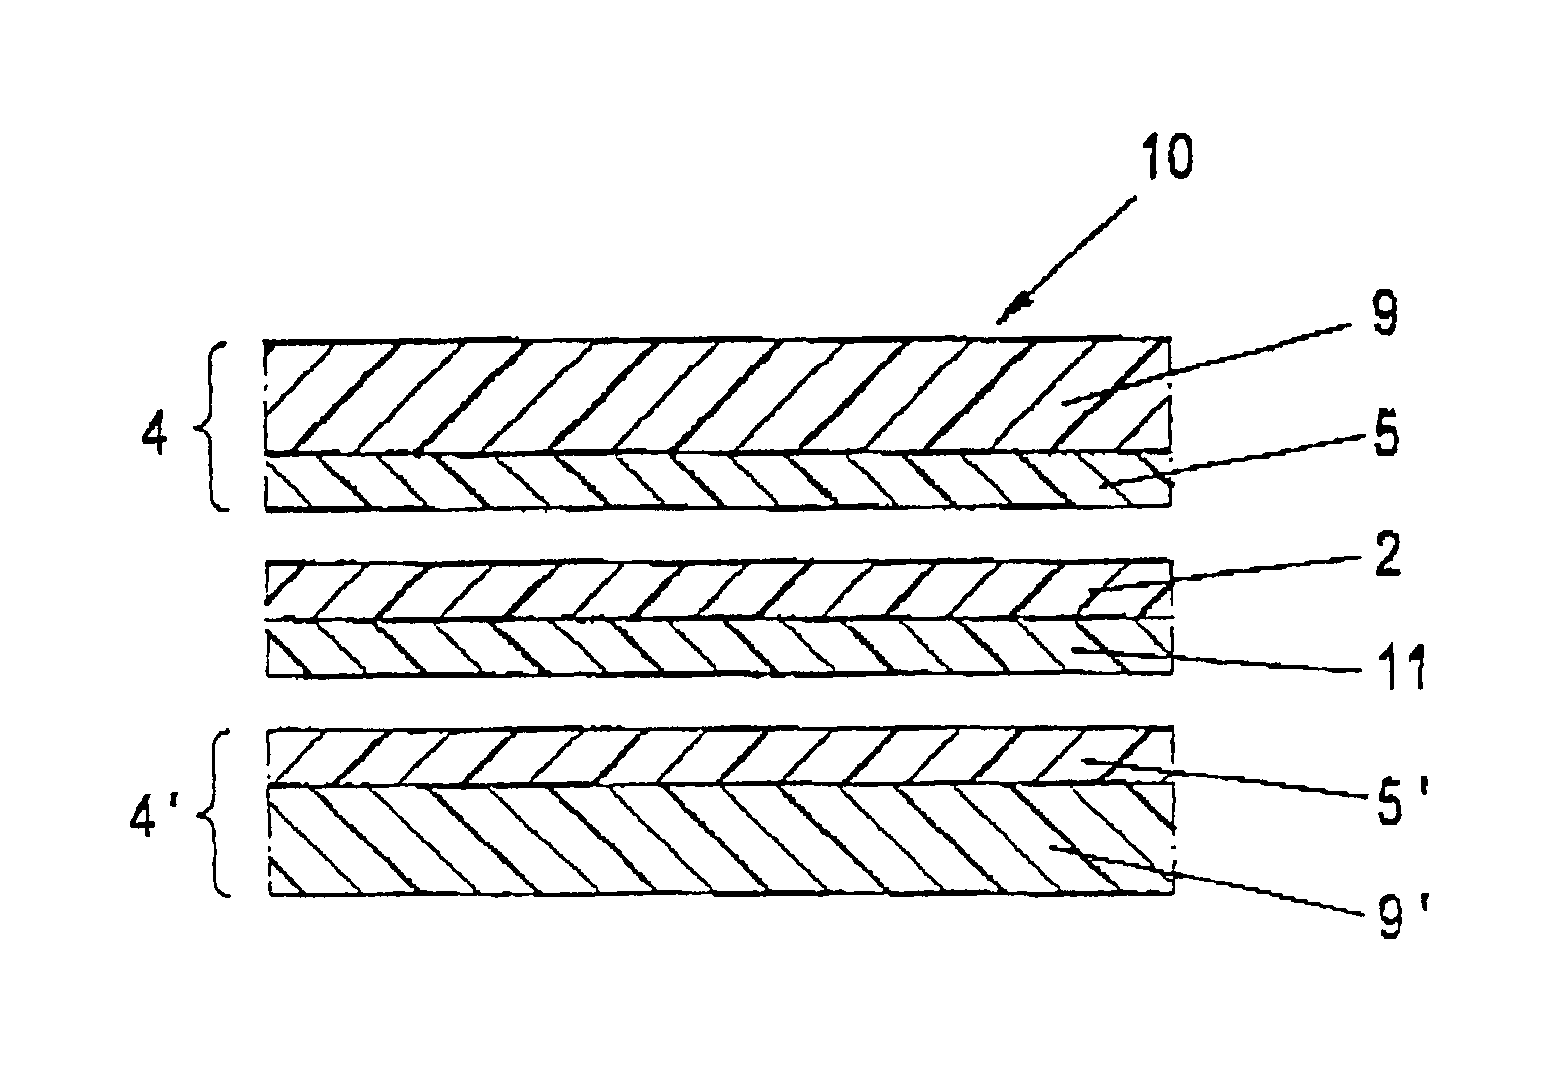 Method for producing photovoltaic thin film module